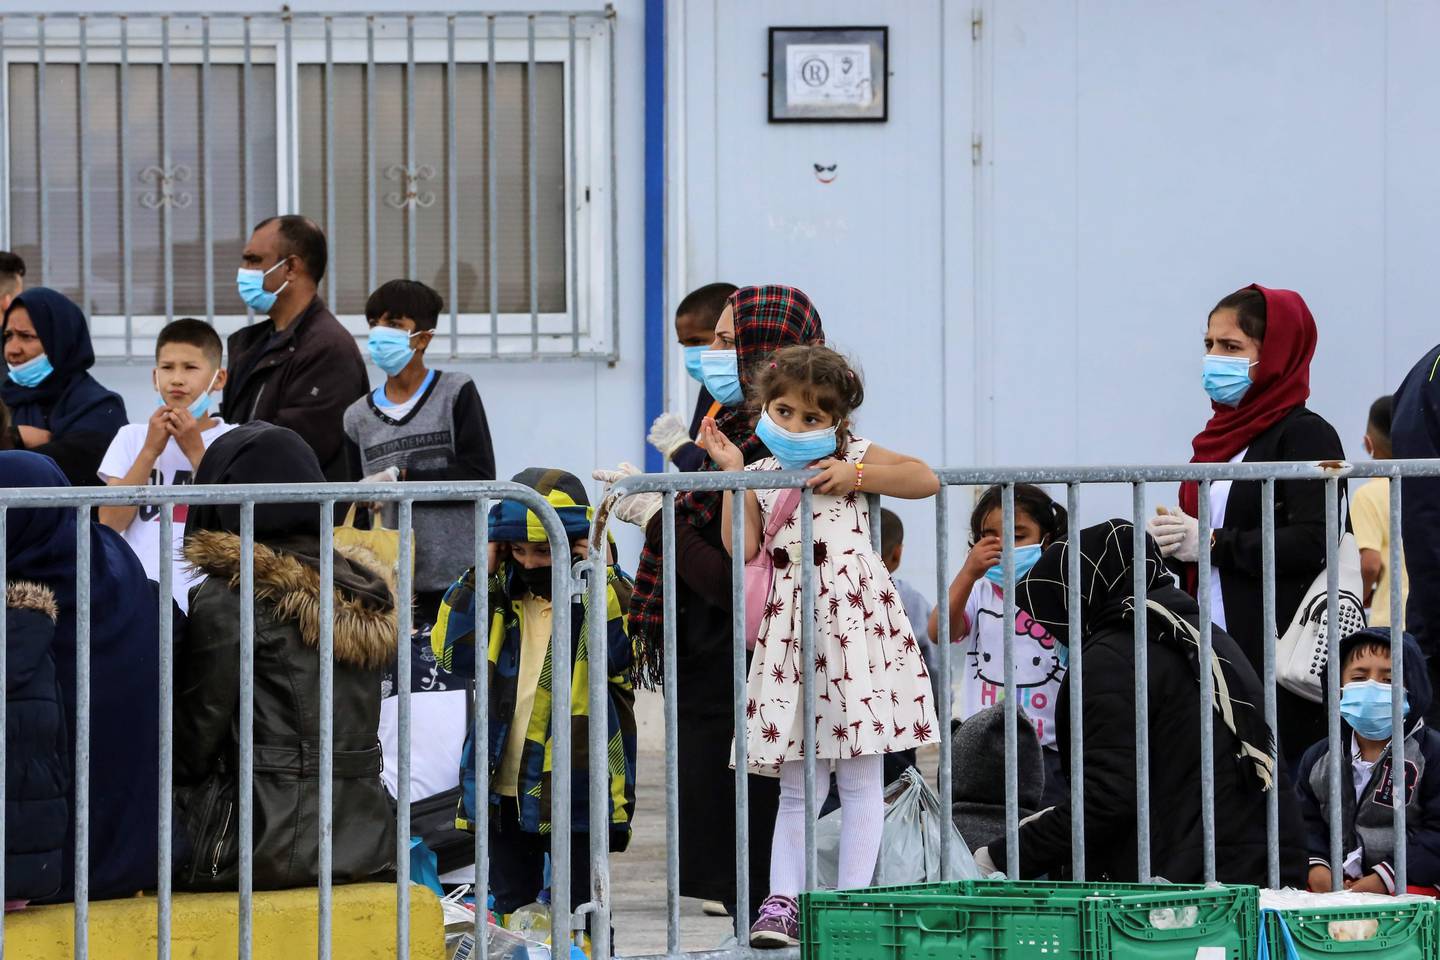 (FILES) In this file photo taken on May 3, 2020 migrants wait at the port of Mytilene to be transferred from the island of Lesbos to the Greek main land in Moria. - Greece will extend to May 21 a coronavirus lockdown imposed since March on migrant camps and which had been expected to be lifted from May 11, 2020, the authorities said. "The coronavirus measures of confinement for those living in migrant camps and in reception centres in Greece are prolonged until May 21," the migration and asylum ministry said in a statement on Sunday, six days after the first easing of the general lockdown in the country. The ministry did not say why the camp lockdown was being extended. (Photo by Manolis Lagoutaris / AFP)